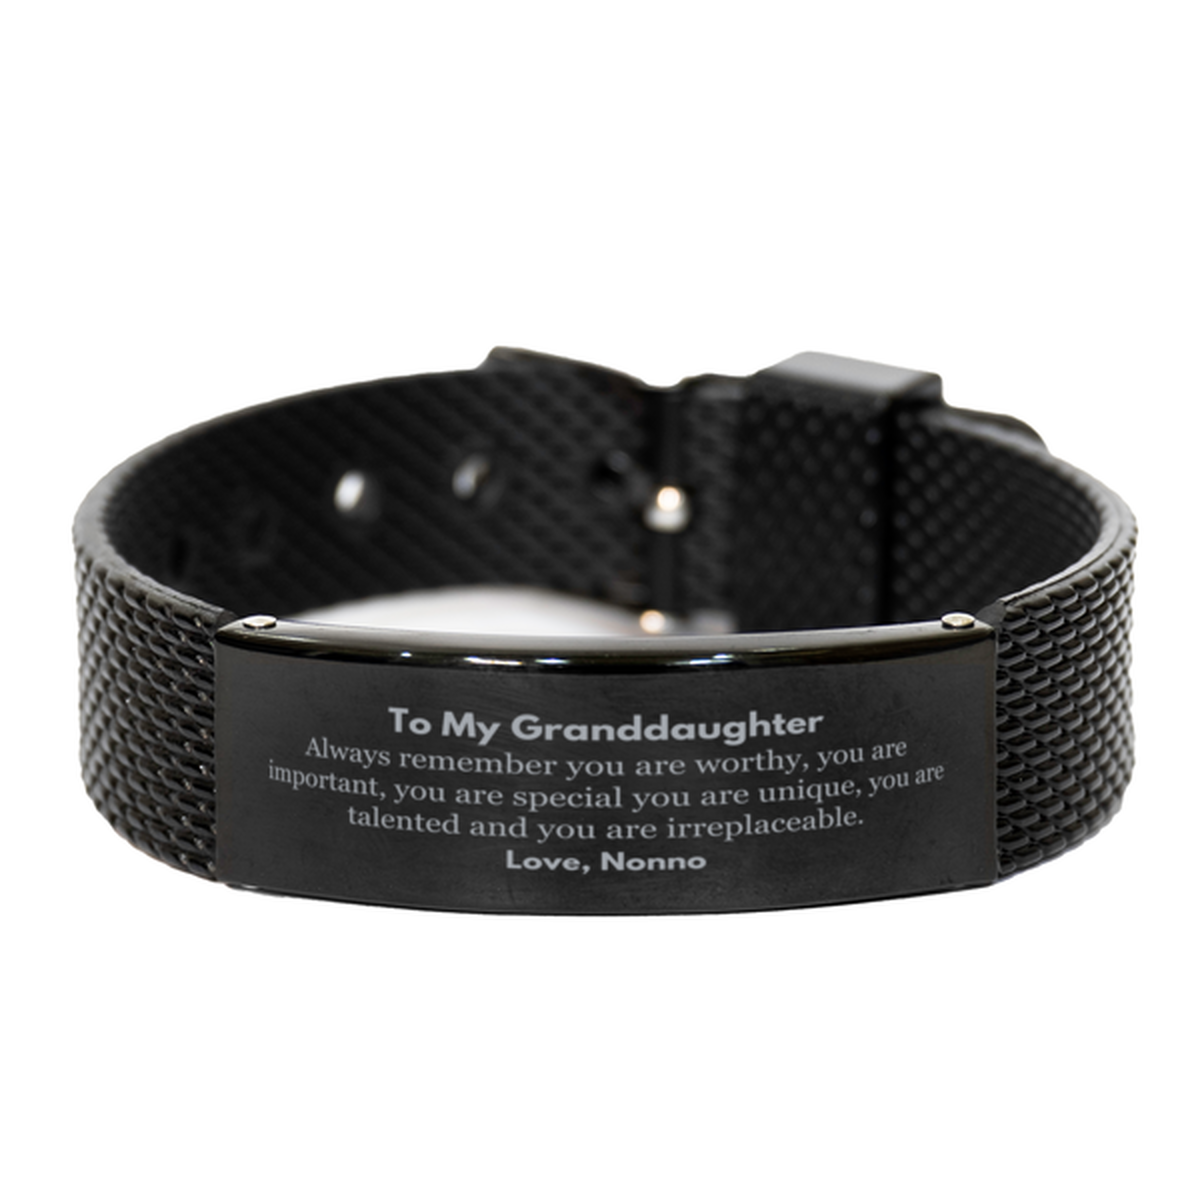 Granddaughter Birthday Gifts from Nonno, Inspirational Black Shark Mesh Bracelet for Granddaughter Christmas Graduation Gifts for Granddaughter Always remember you are worthy, you are important. Love, Nonno